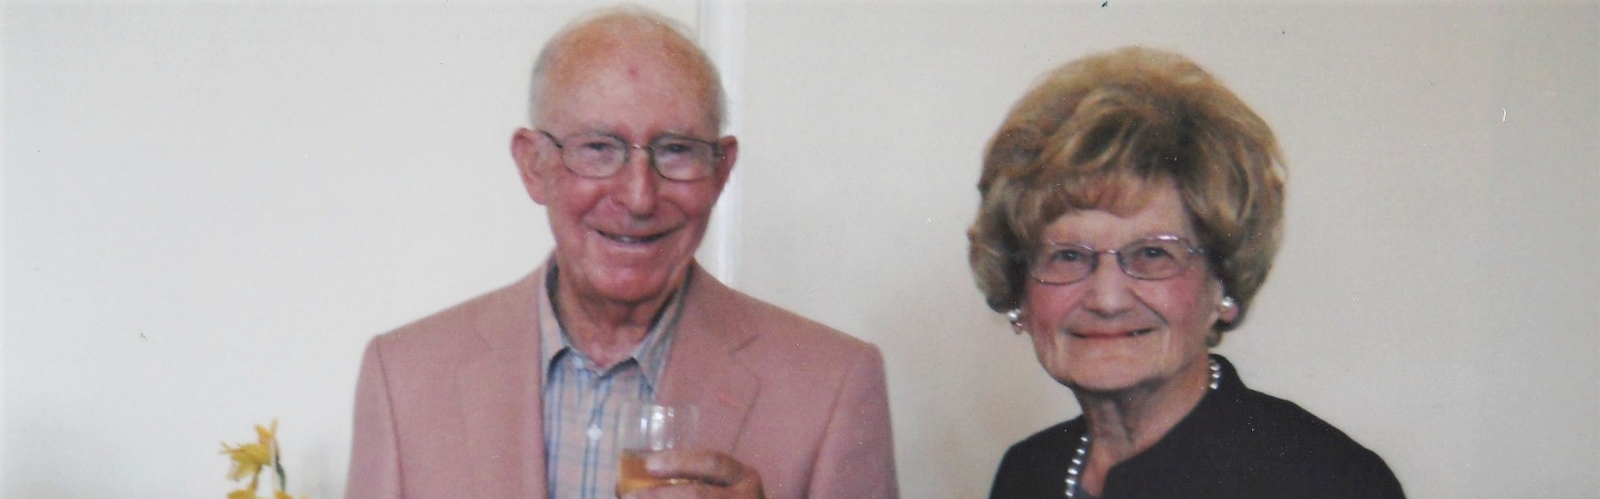 An older couple, smiling at the camera